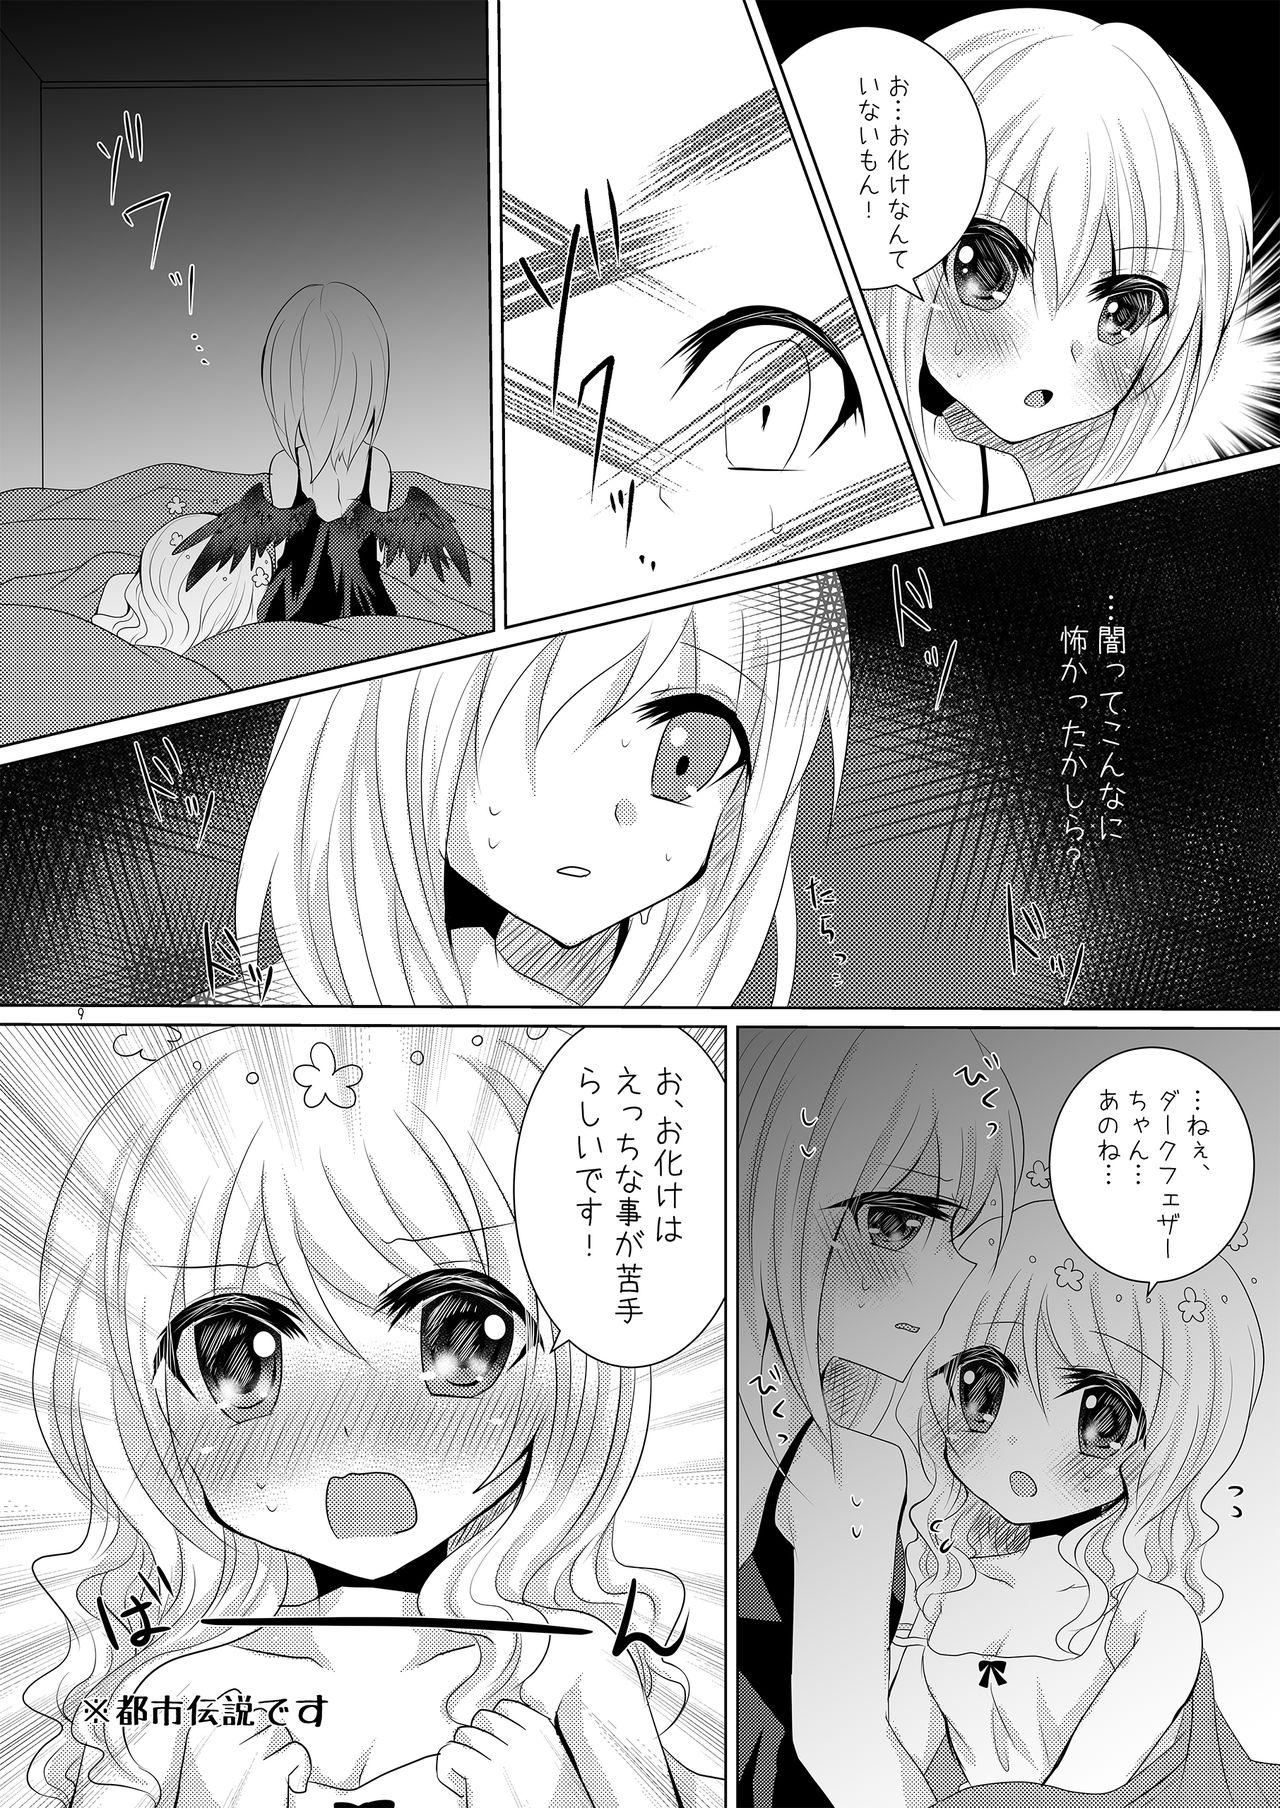 Tanga Tenshi no Tawamure - Emil chronicle online Webcamchat - Page 8